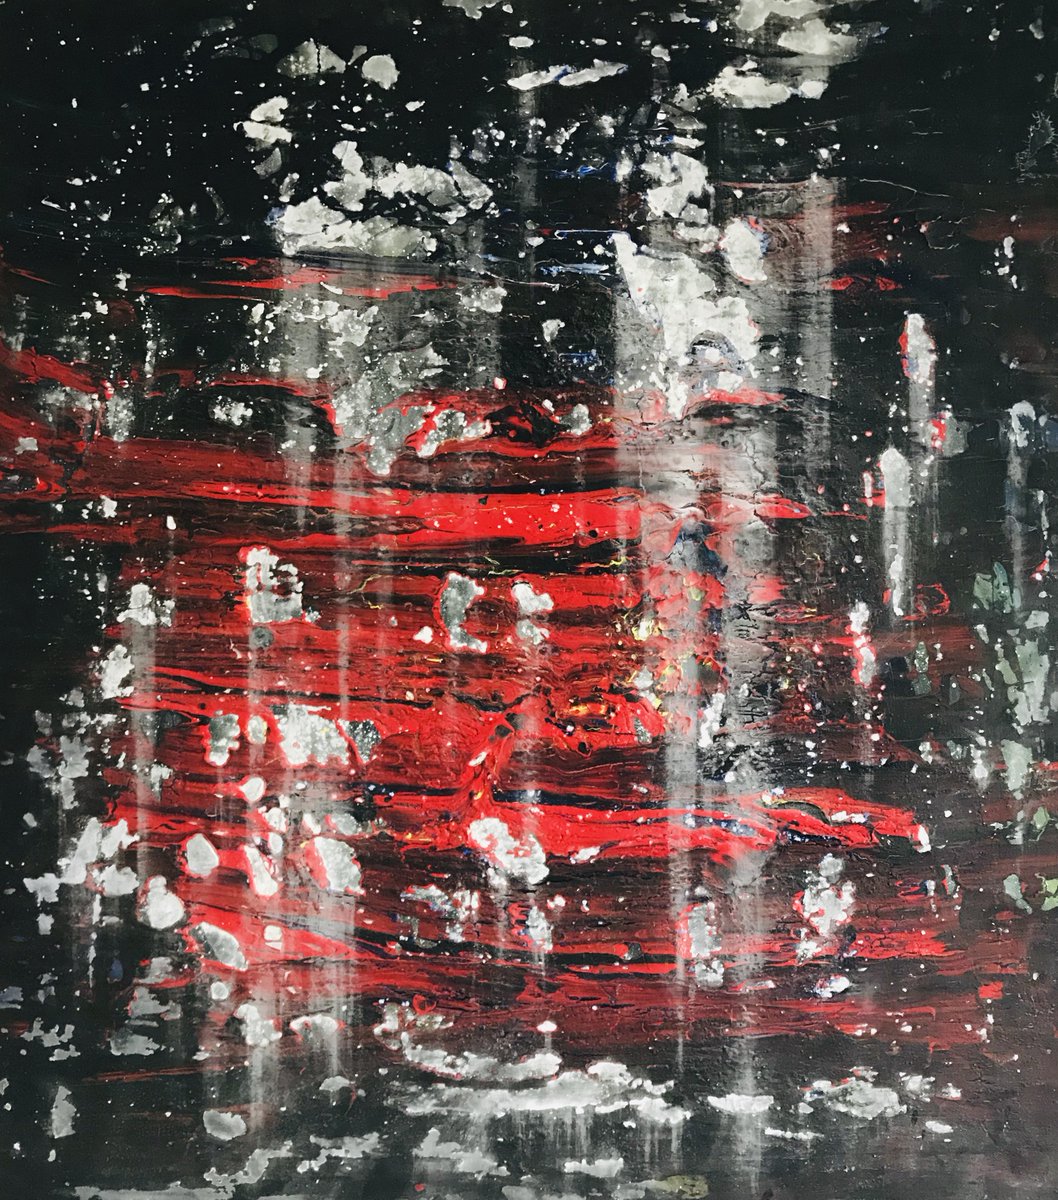 Learn #Abstract #Painting with #Acrylic and mixed mediums on canvas with LunaNguyen.com

#paintingoncanvas #uniqueartpiece #paintwithacrylic 
#abstracts #abstractartist #howtopaintabstract #theartofabstract #lunanguyen #artists #artinternational #beautifulredpainting